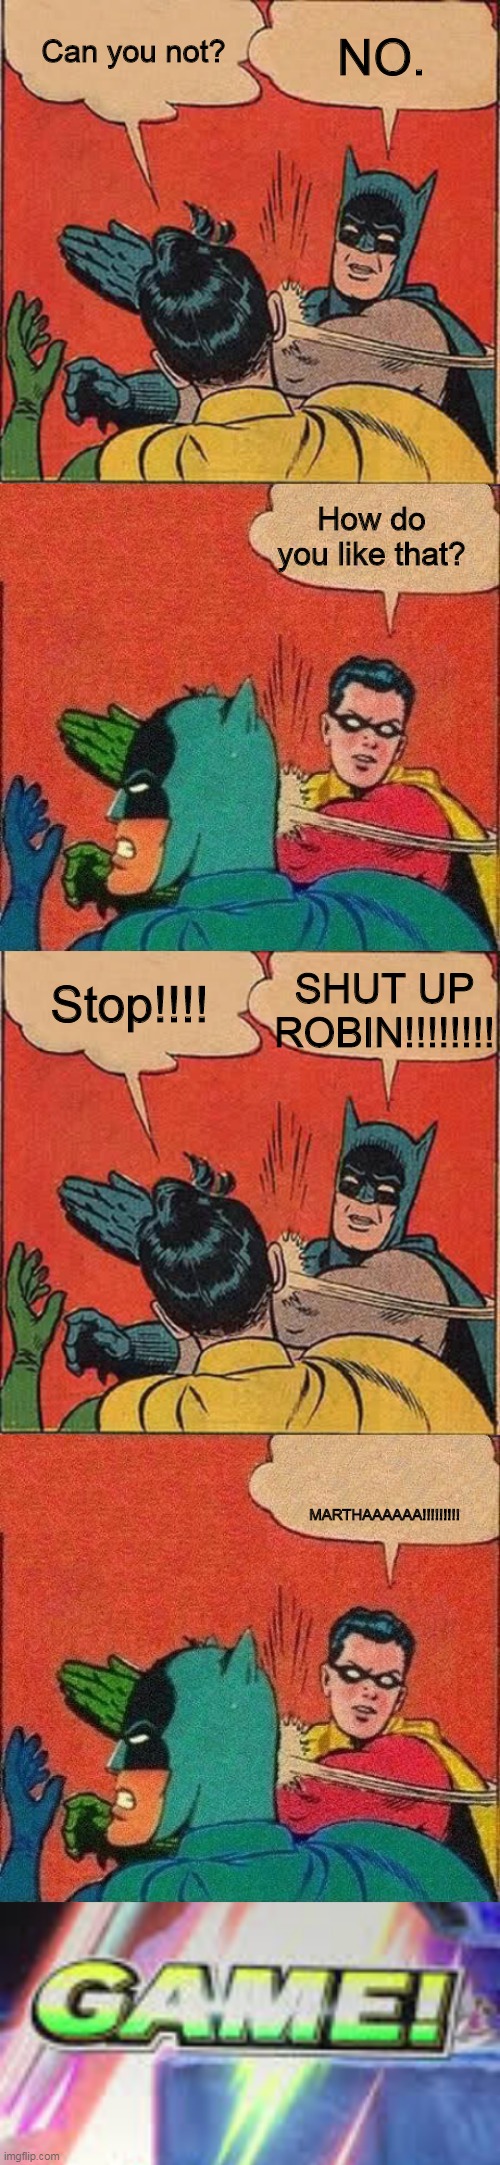 F in the chat | NO. Can you not? How do you like that? Stop!!!! SHUT UP ROBIN!!!!!!!! MARTHAAAAAA!!!!!!!!! | image tagged in memes,batman slapping robin,robin slaps batman | made w/ Imgflip meme maker